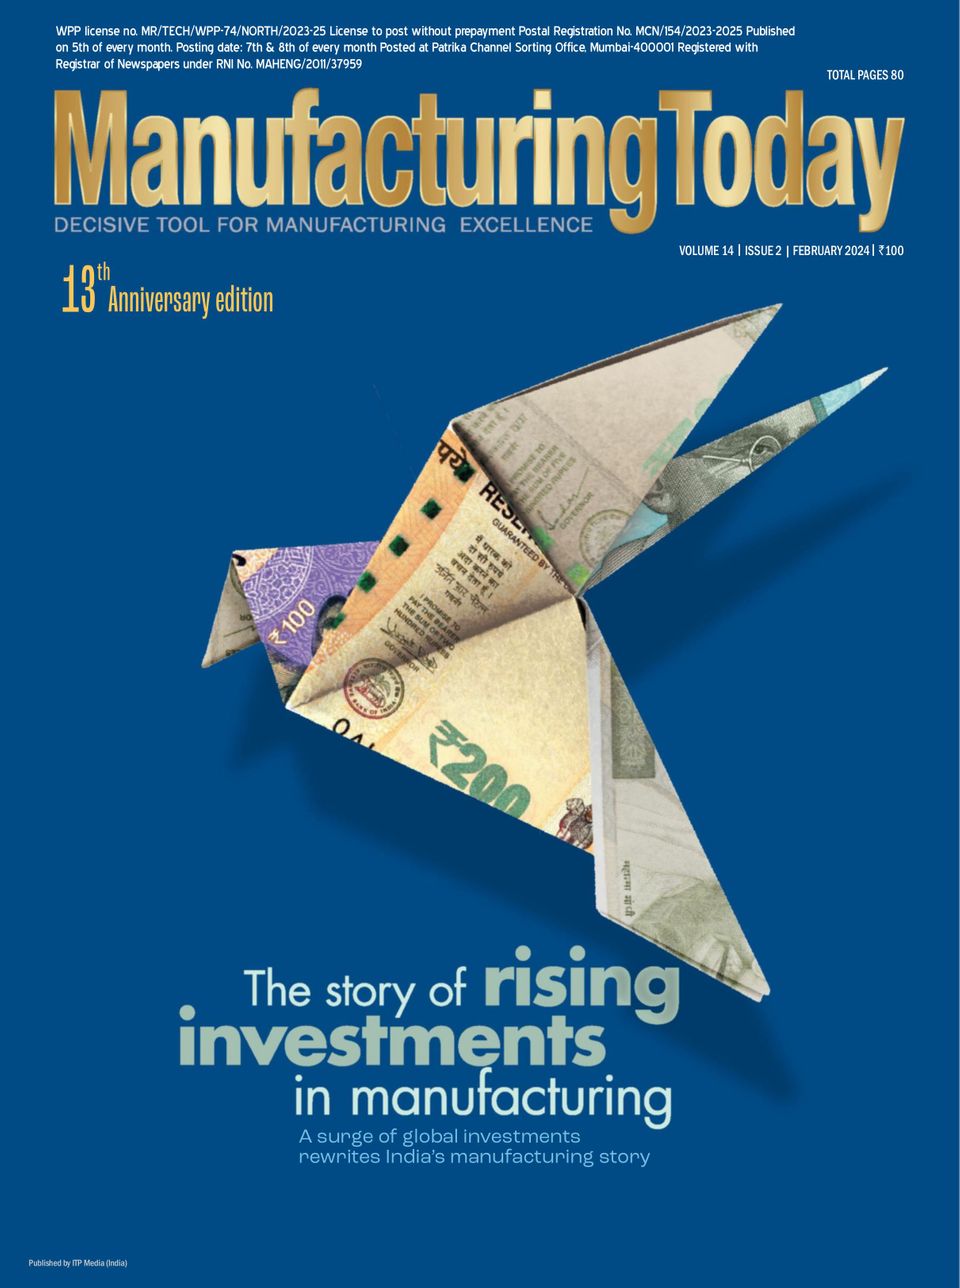 1315490 Manufacturing Today Cover February 2024 Issue 